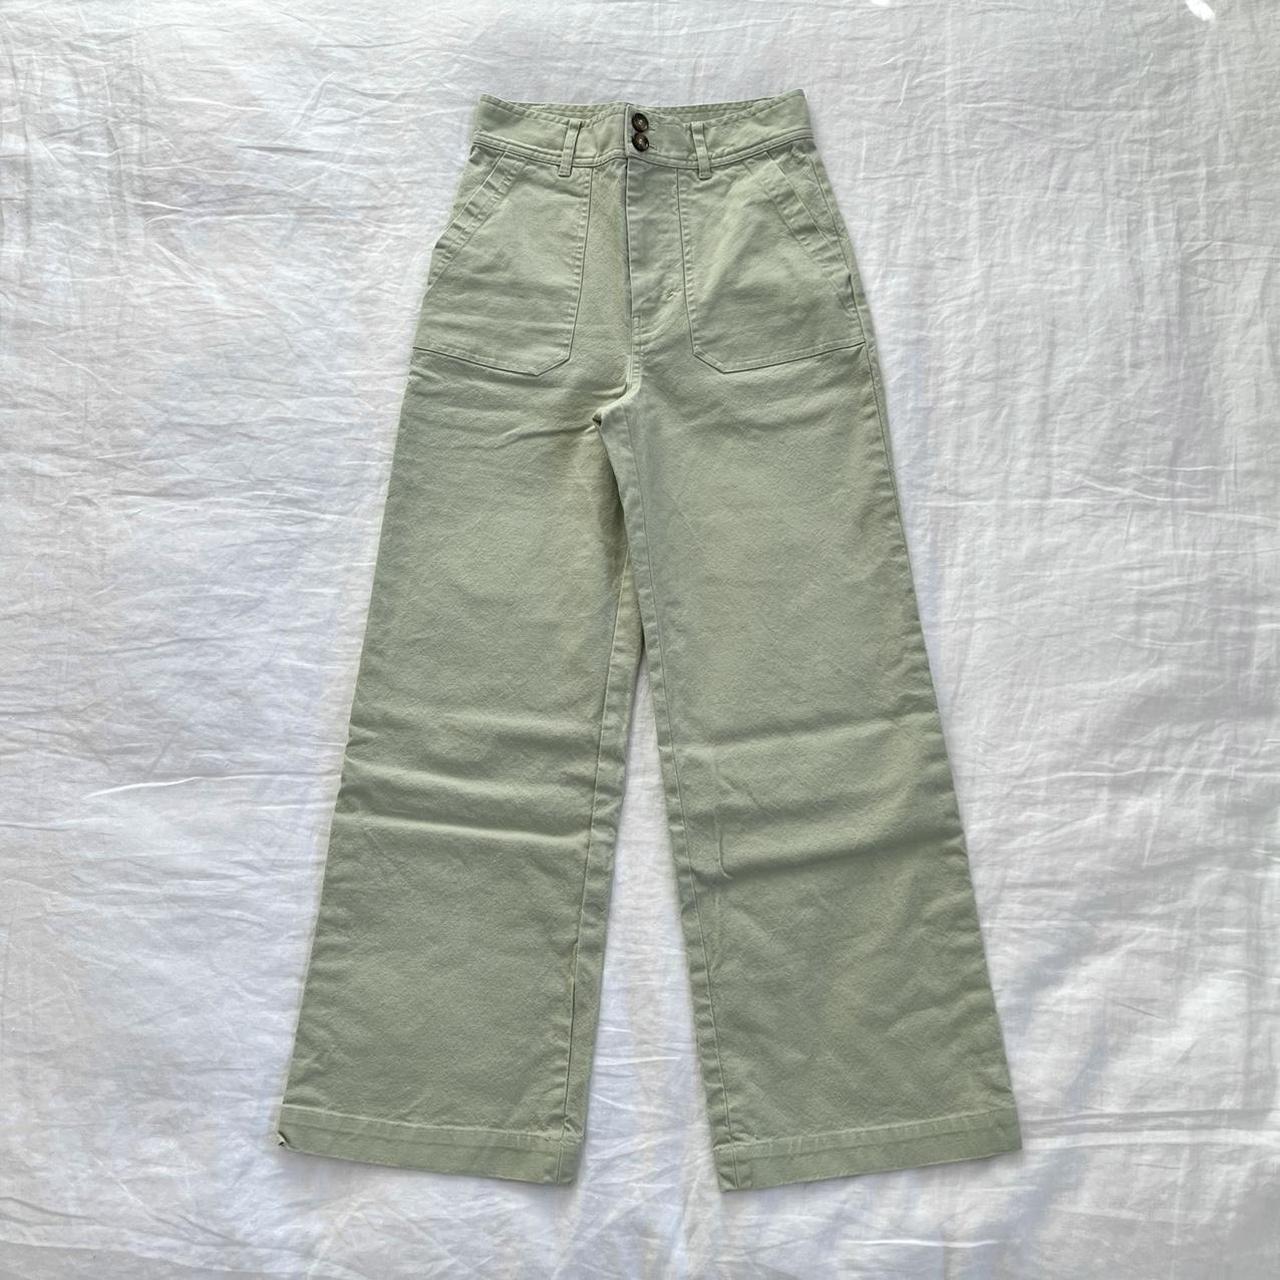 & Other Stories Women's Green Trousers | Depop